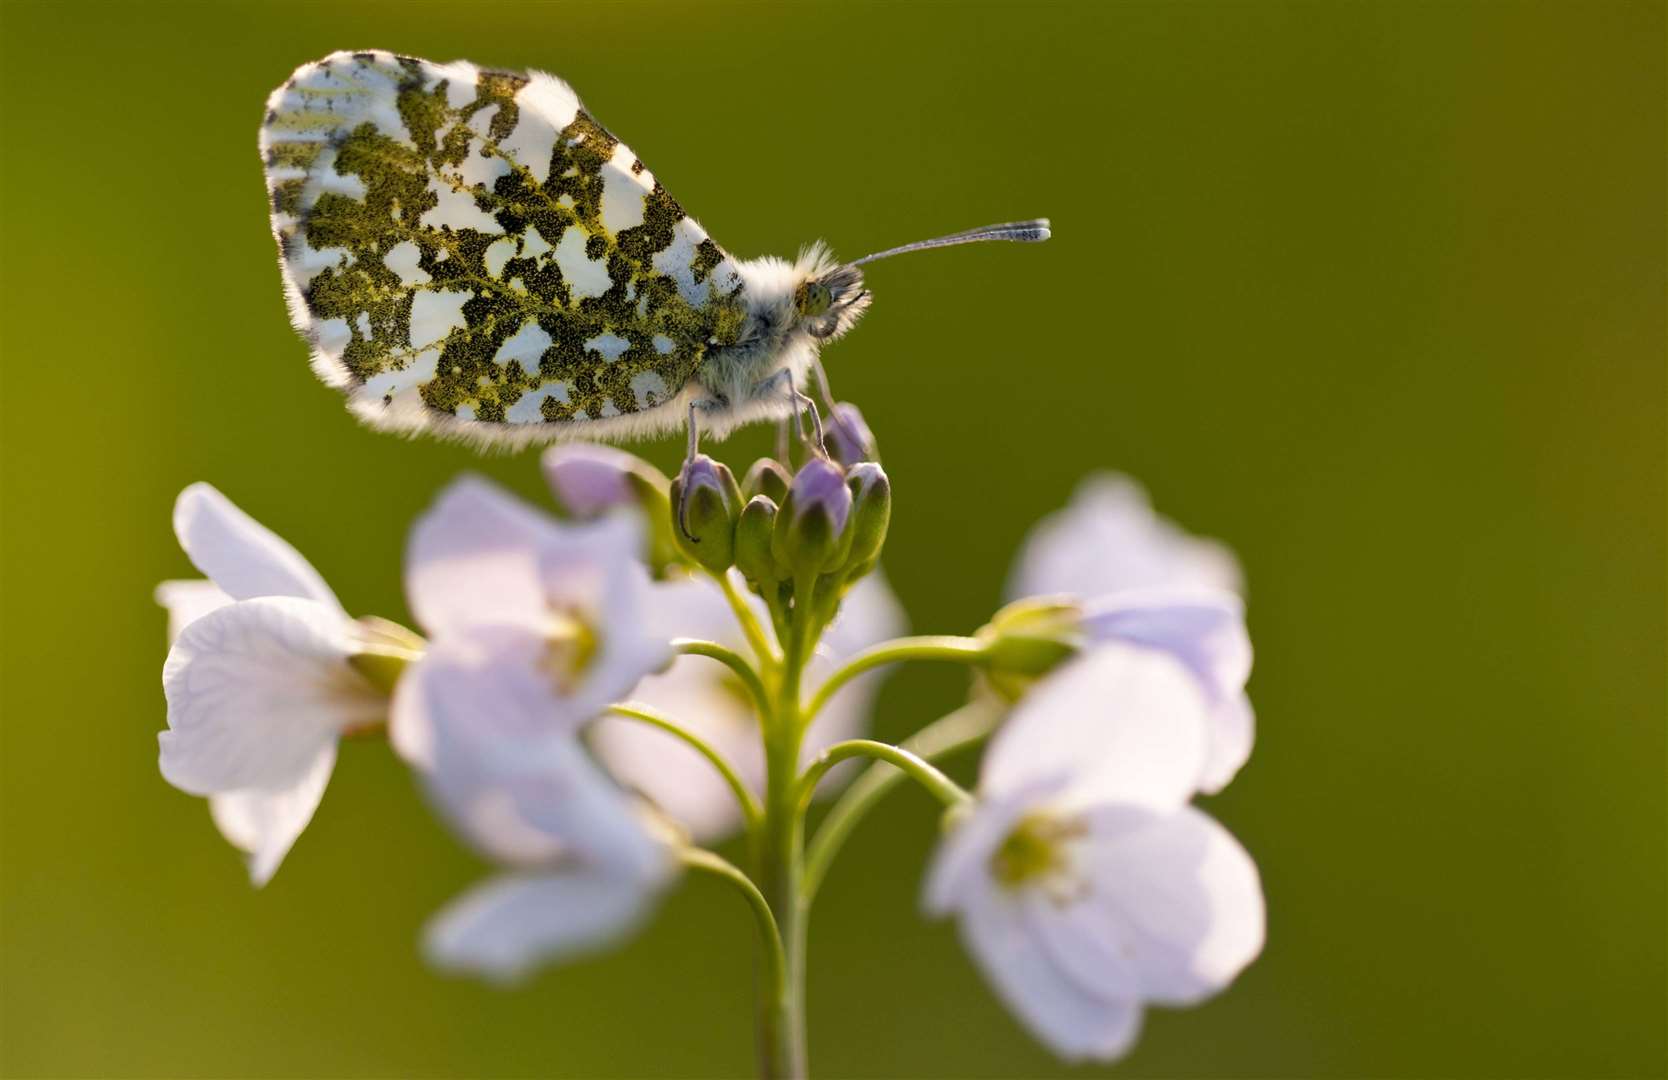 Plants can encourage caterpillars and so butterflies like the Orange Tip butterfly Picture: Ross Hoddinott